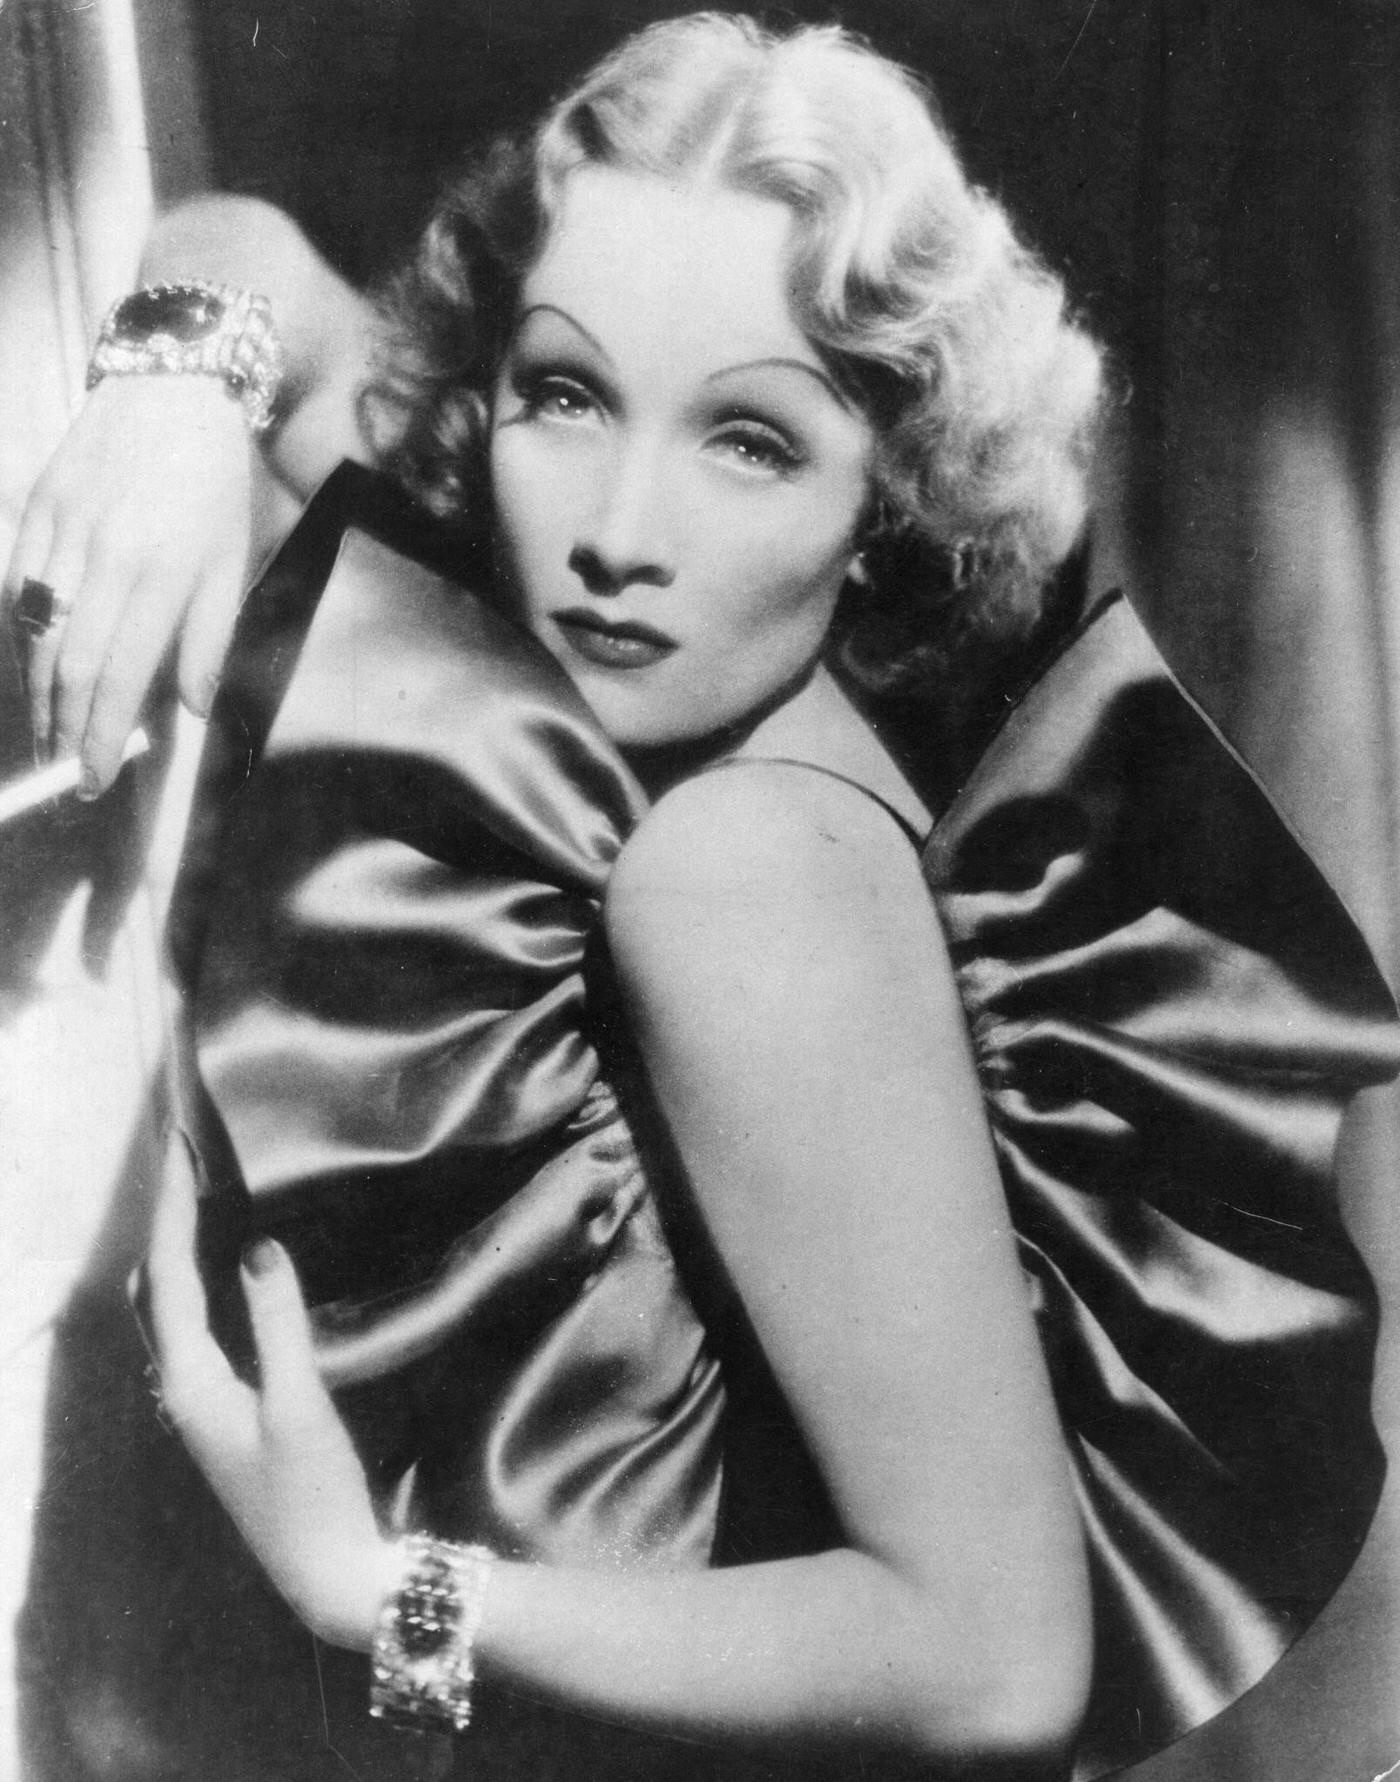 Marlene Dietrich poses in a typical arrogant yet sexy stance for 'The Devil is a Woman.'